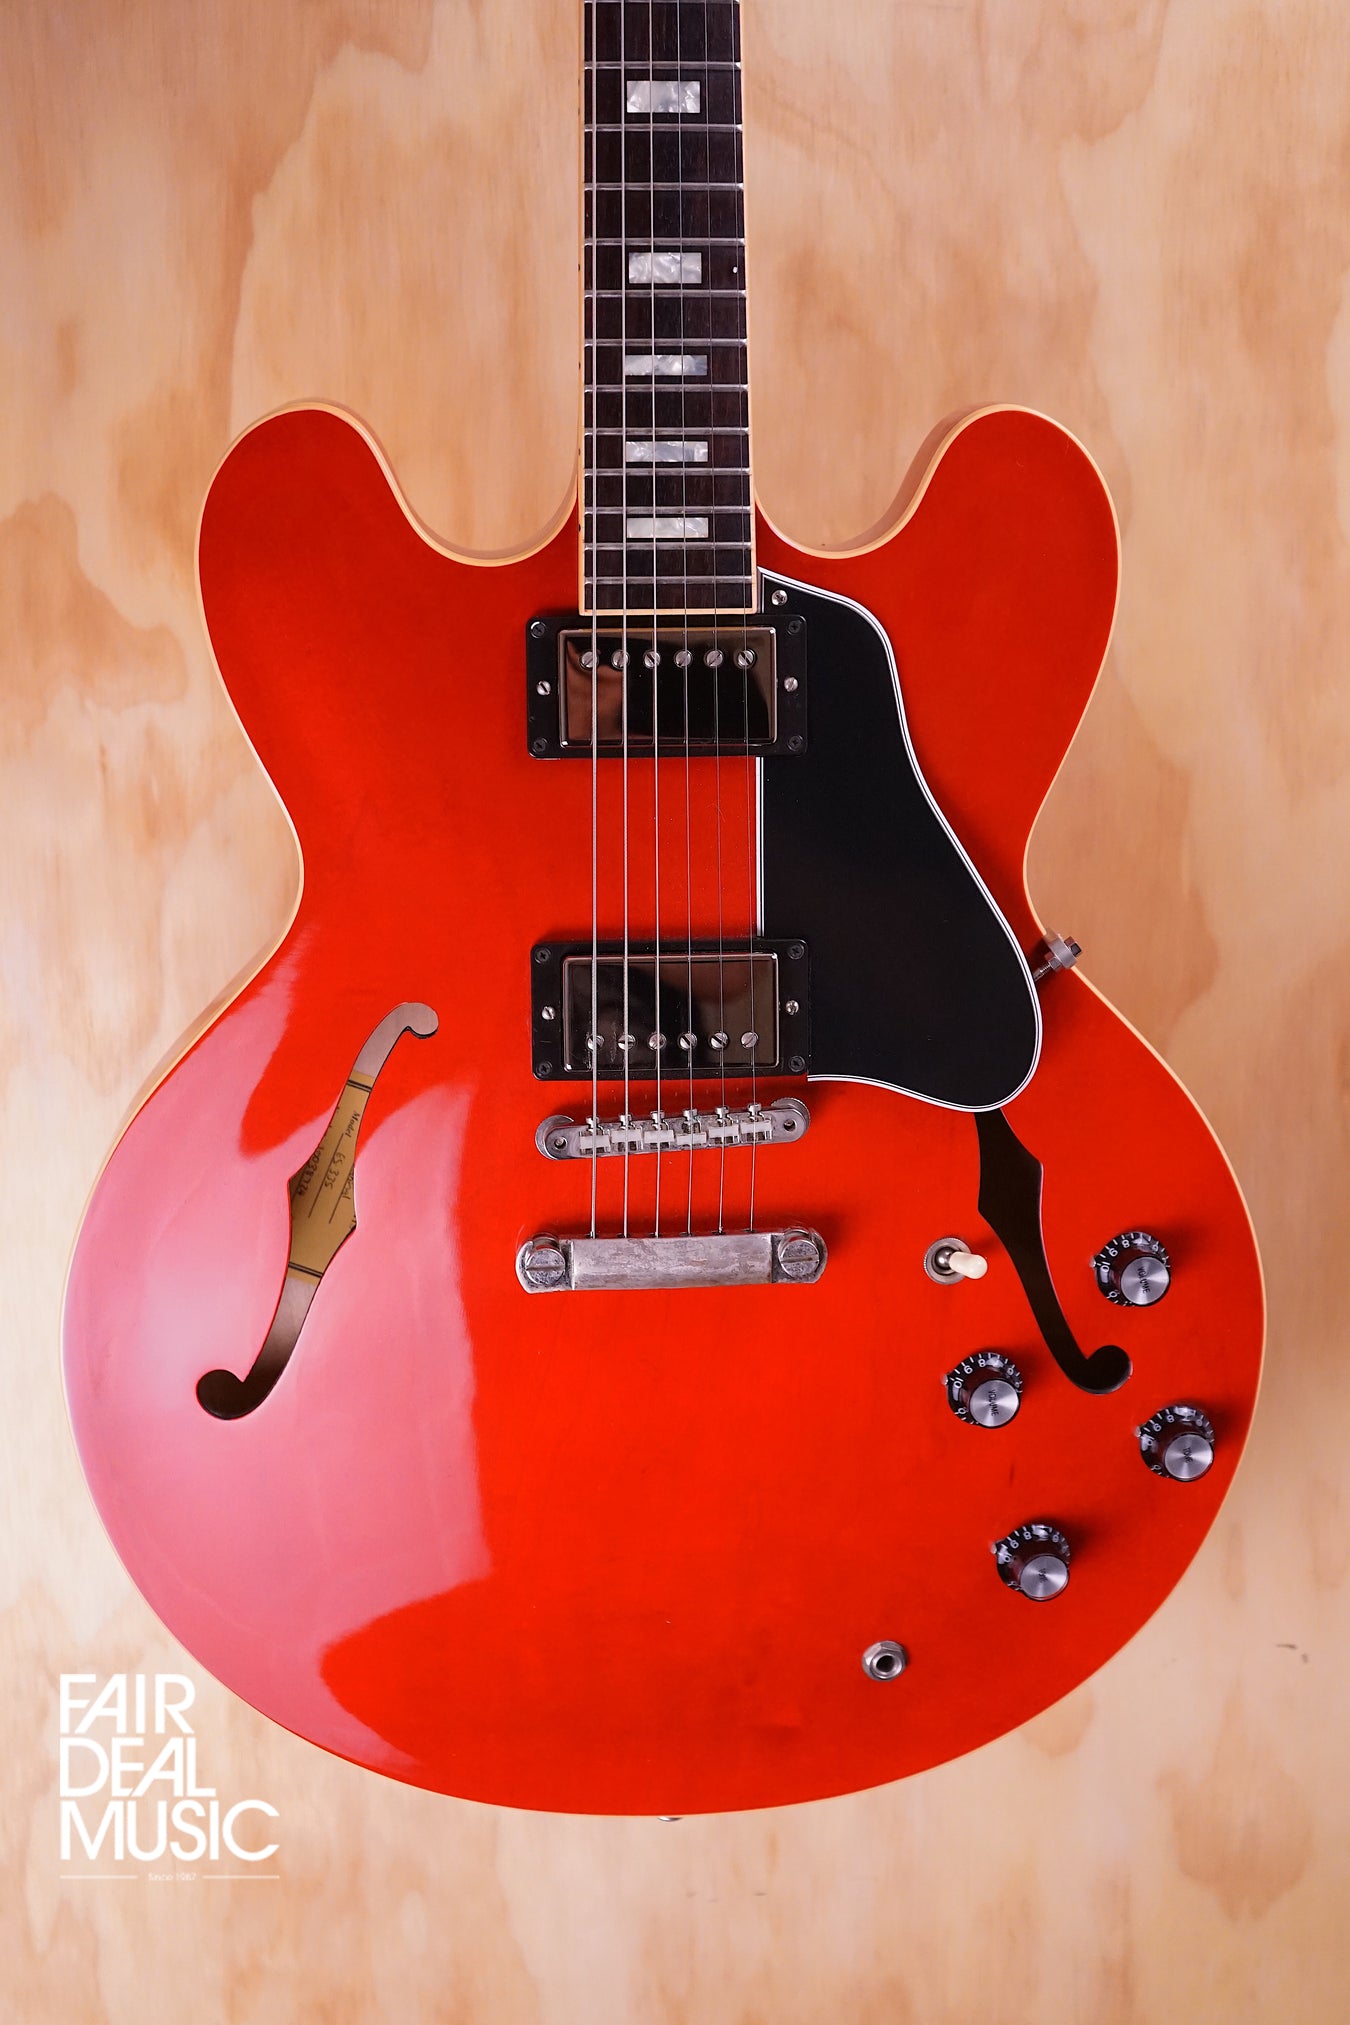 Gibson ES-335 Traditional in Cherry, USED - Fair Deal Music